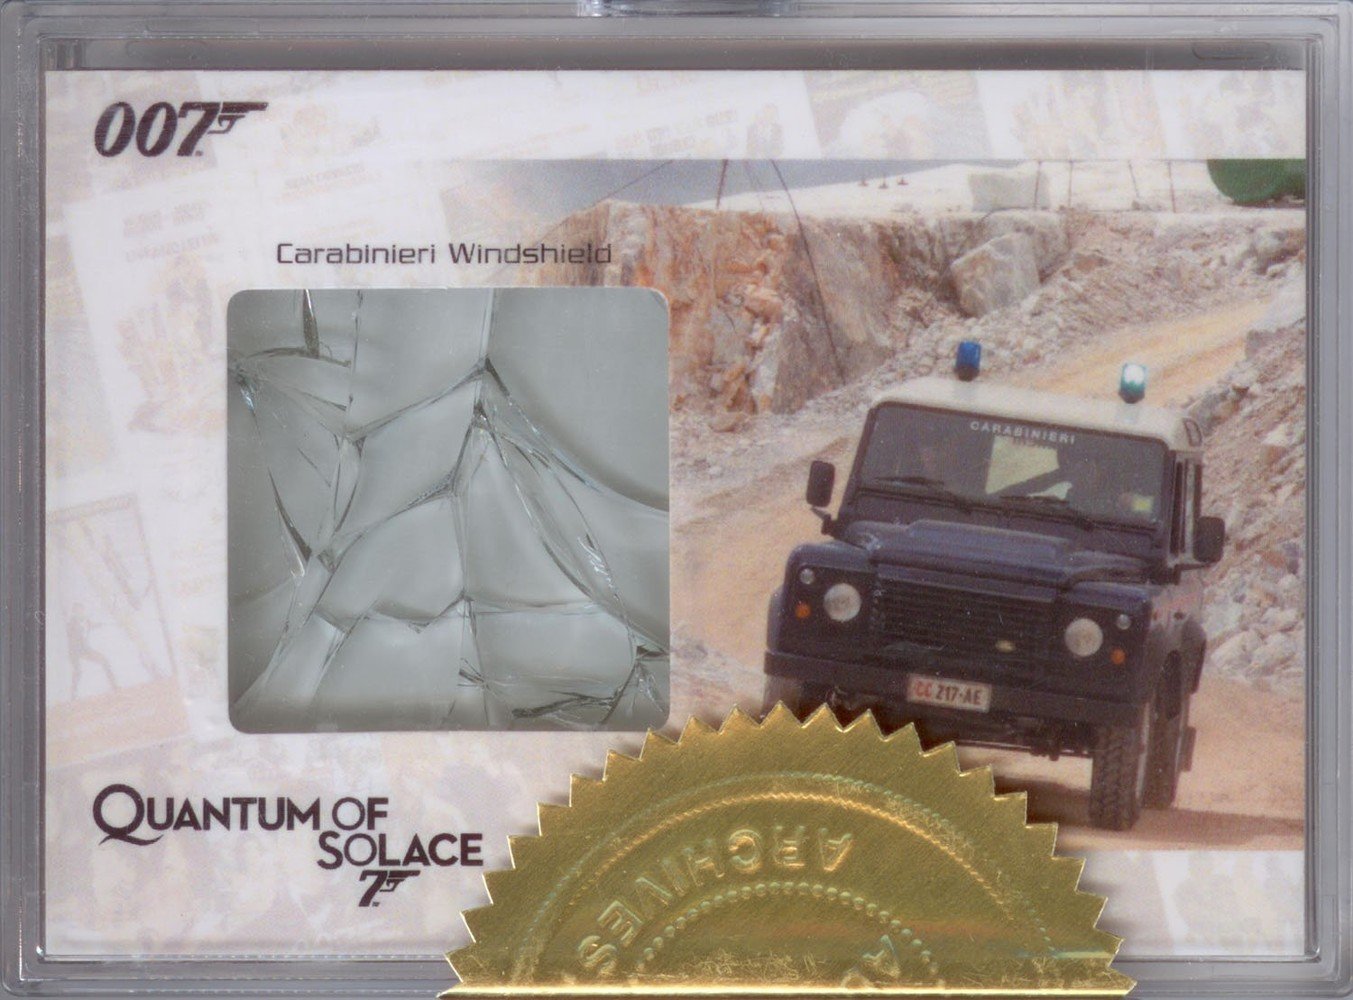 Rittenhouse Archives James Bond: Heroes and Villains Relic Card JBR12 Carabinieri Windshield from Quantum of Solace